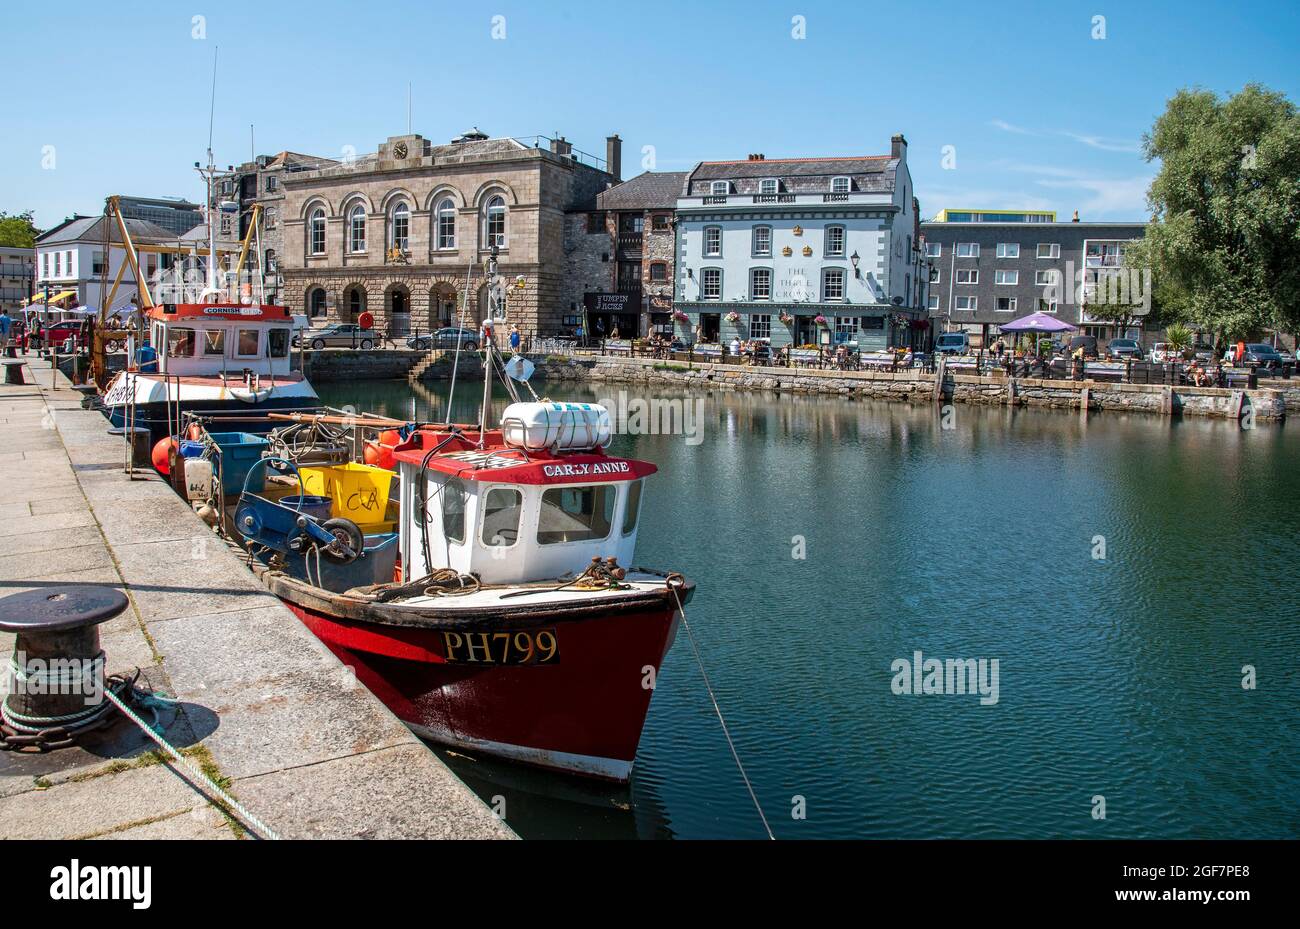 Plymouth, Devon, England, UK. 2021. Sutton Harbour in the Barbican area of Plymouth,buildings surround the waterfront including the old Custom House a Stock Photo